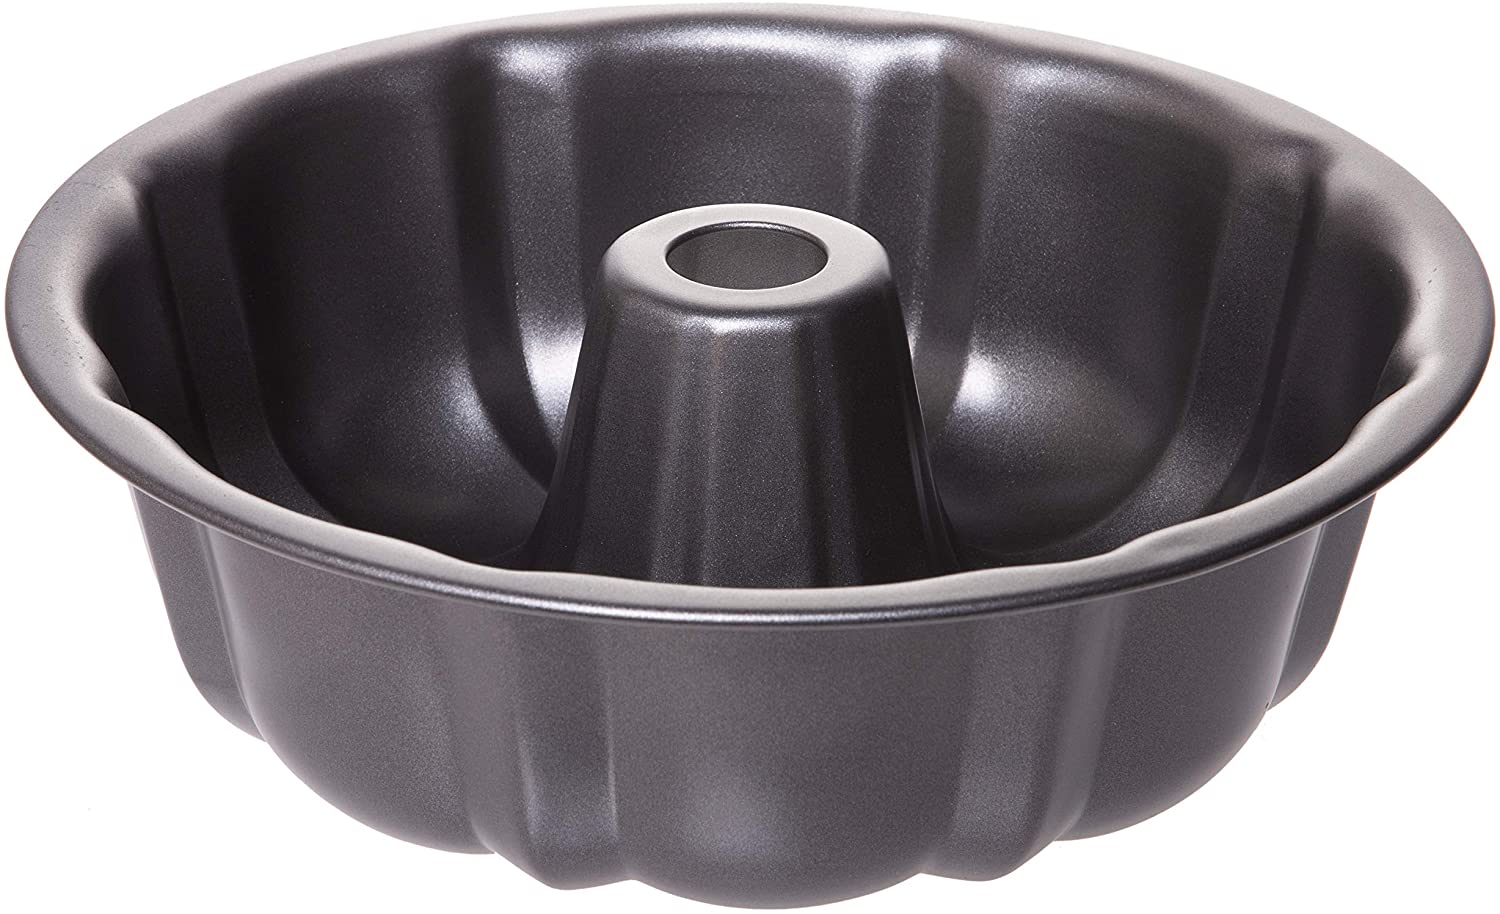 Red Co. Original Non-Stick Cake Fluted Tube Pan, 10-Inch